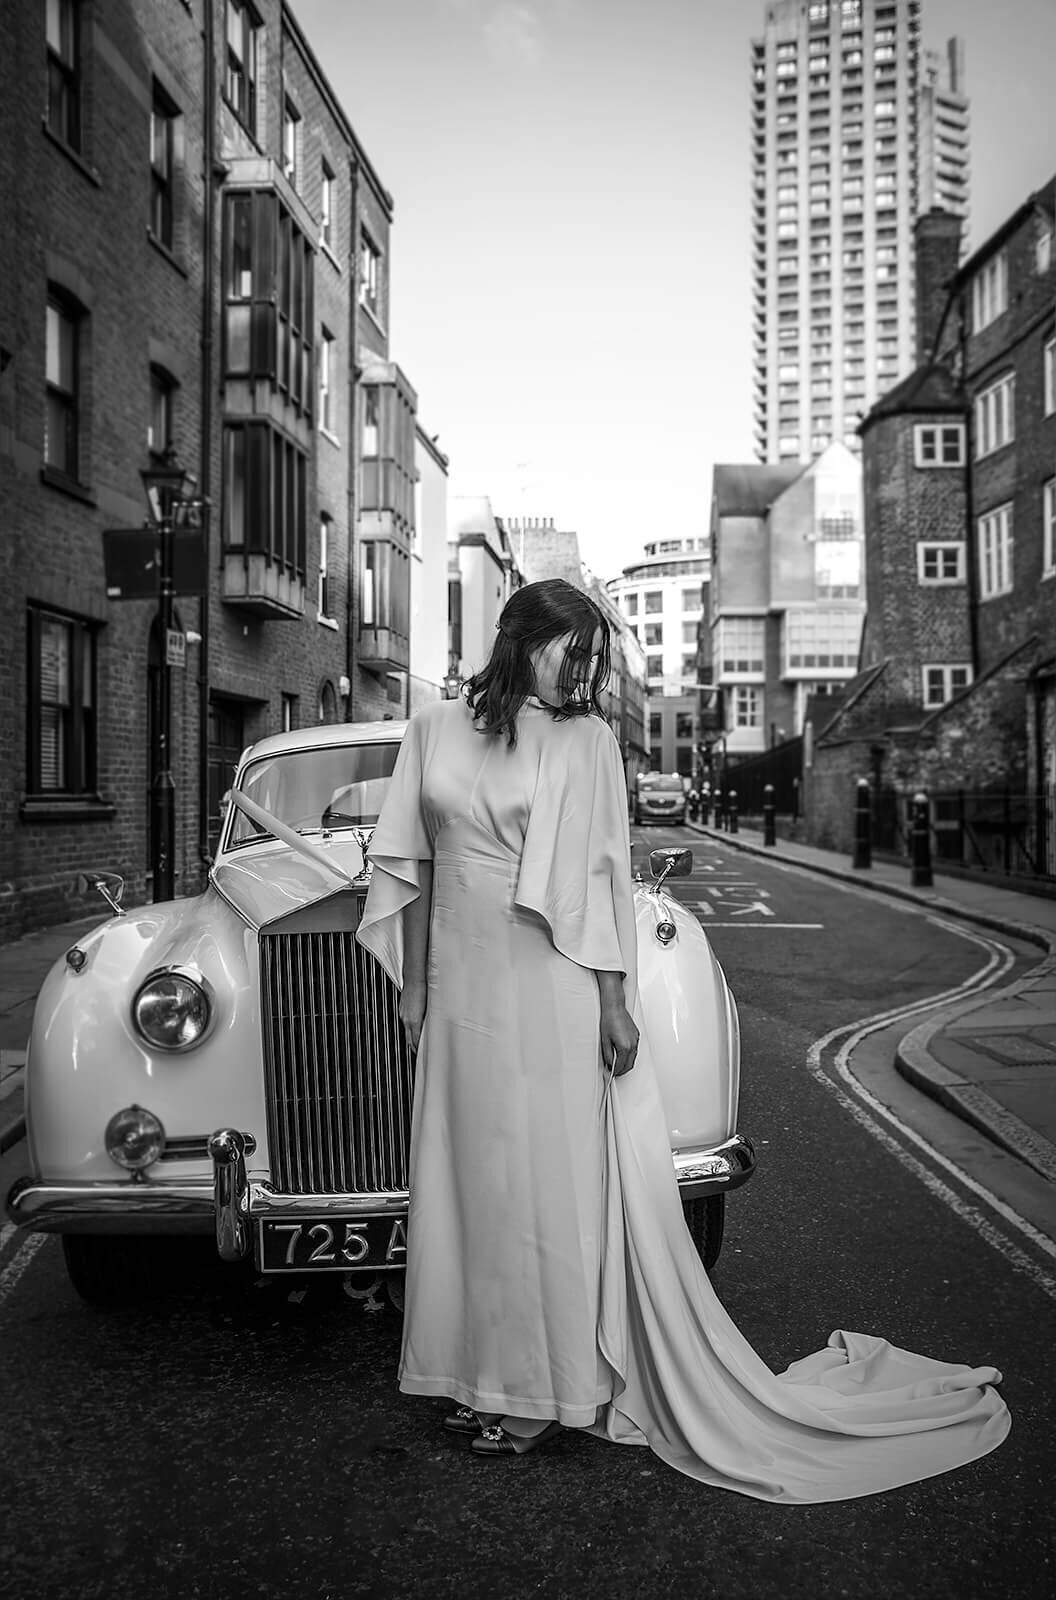 Bride poses by Rolls Royce looking down at dress train